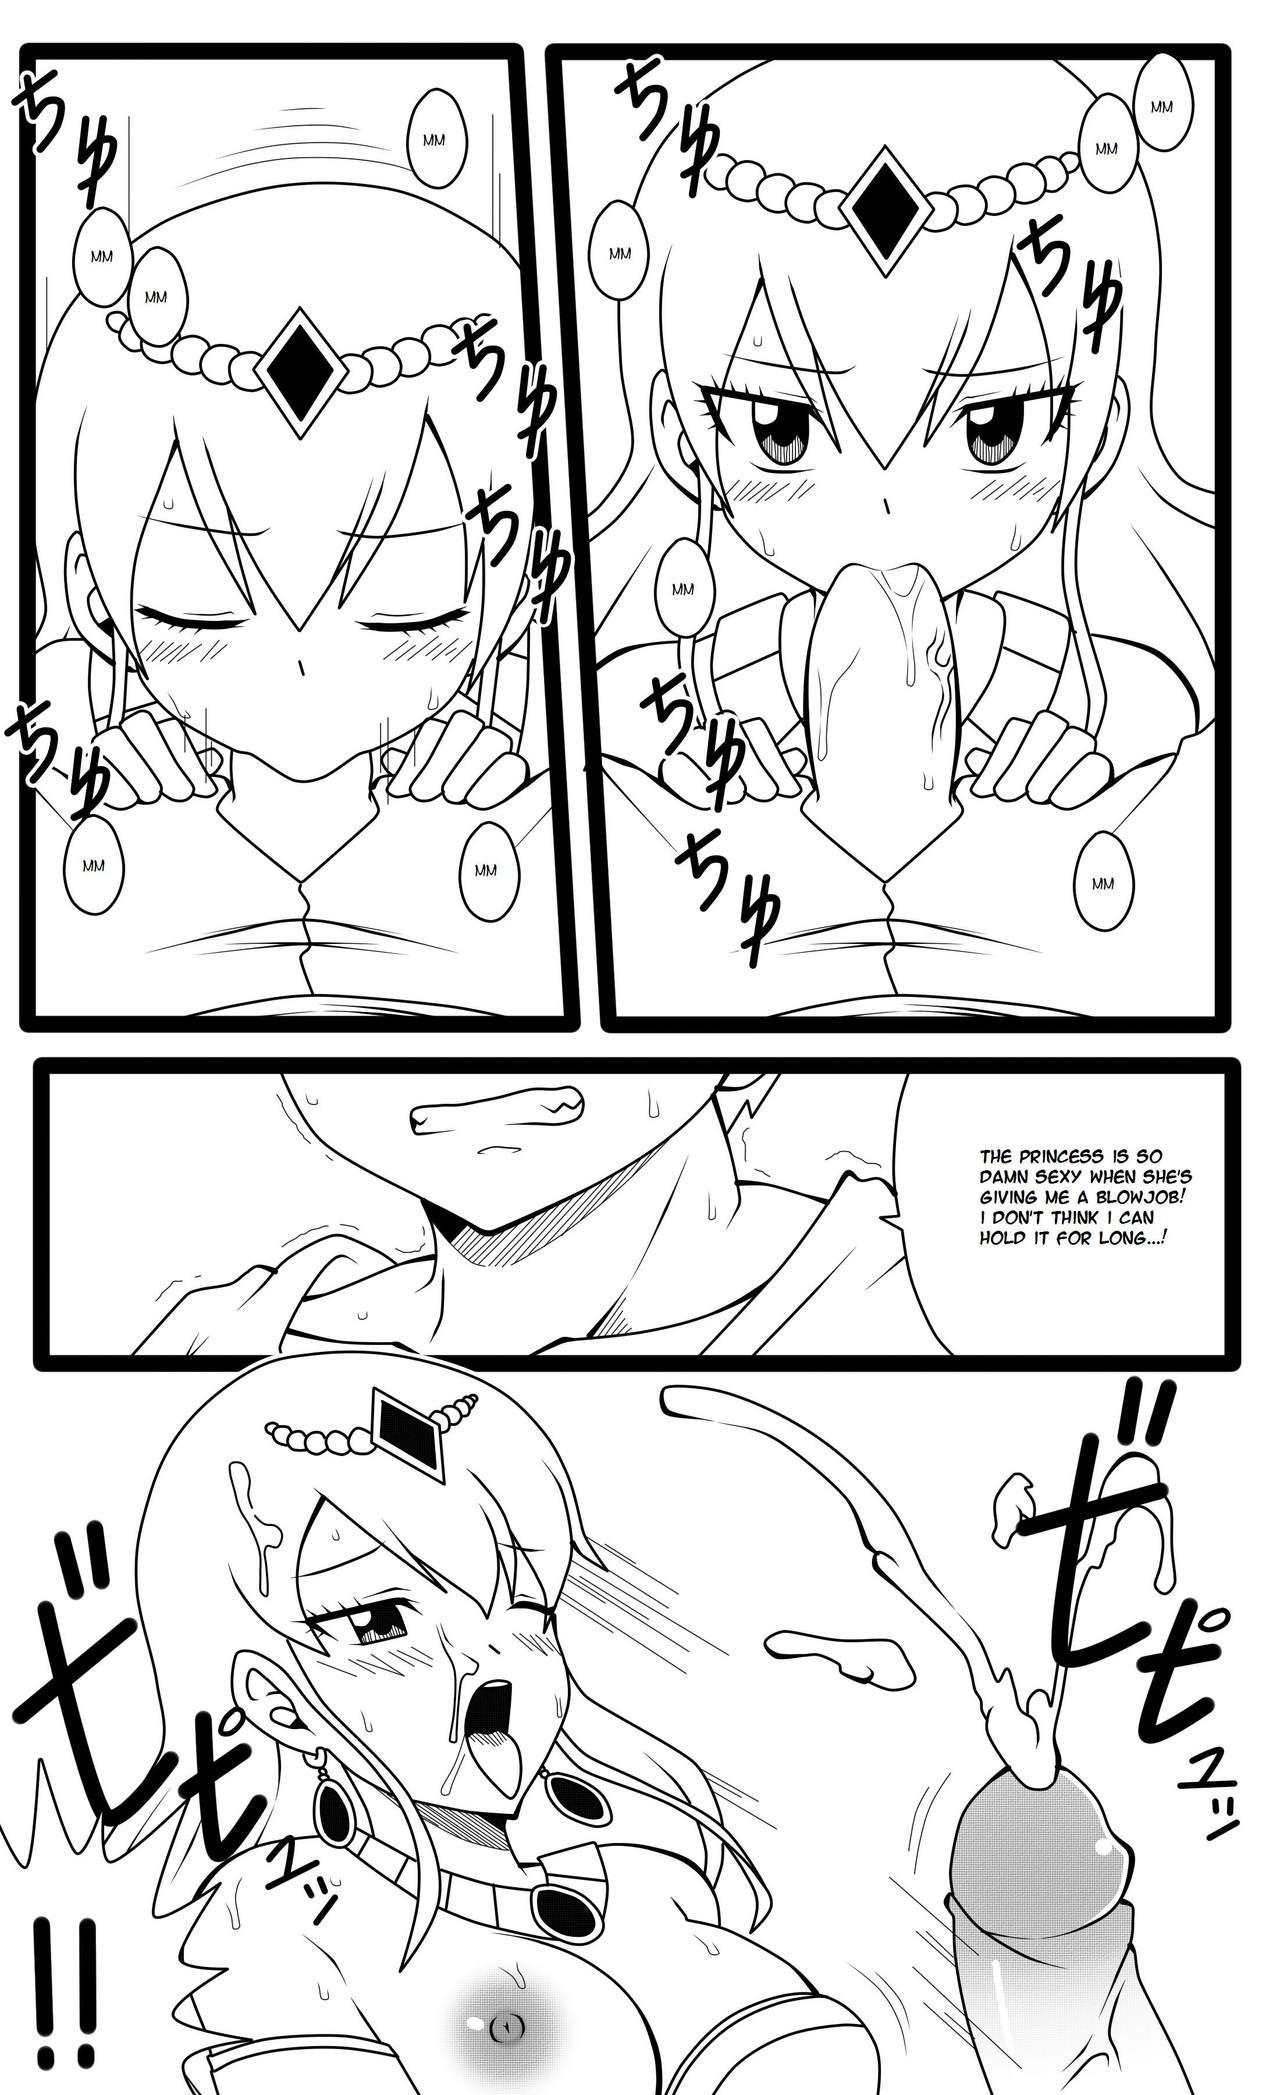 Tugging Hisui's Royal Treatment - Fairy tail Licking - Page 5